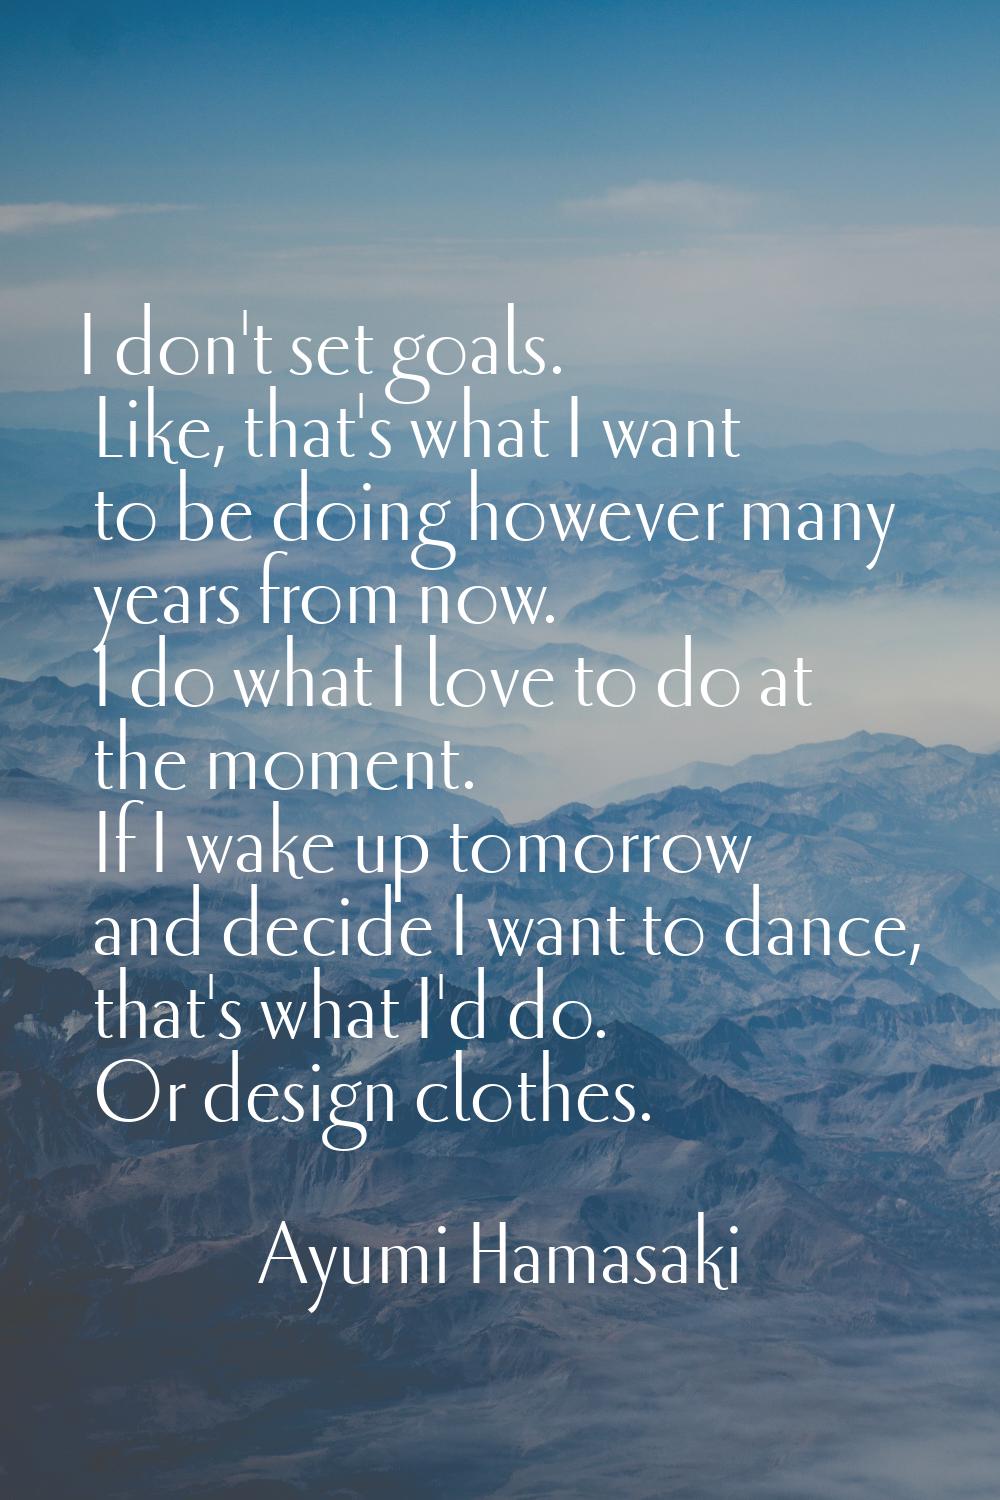 I don't set goals. Like, that's what I want to be doing however many years from now. I do what I lo